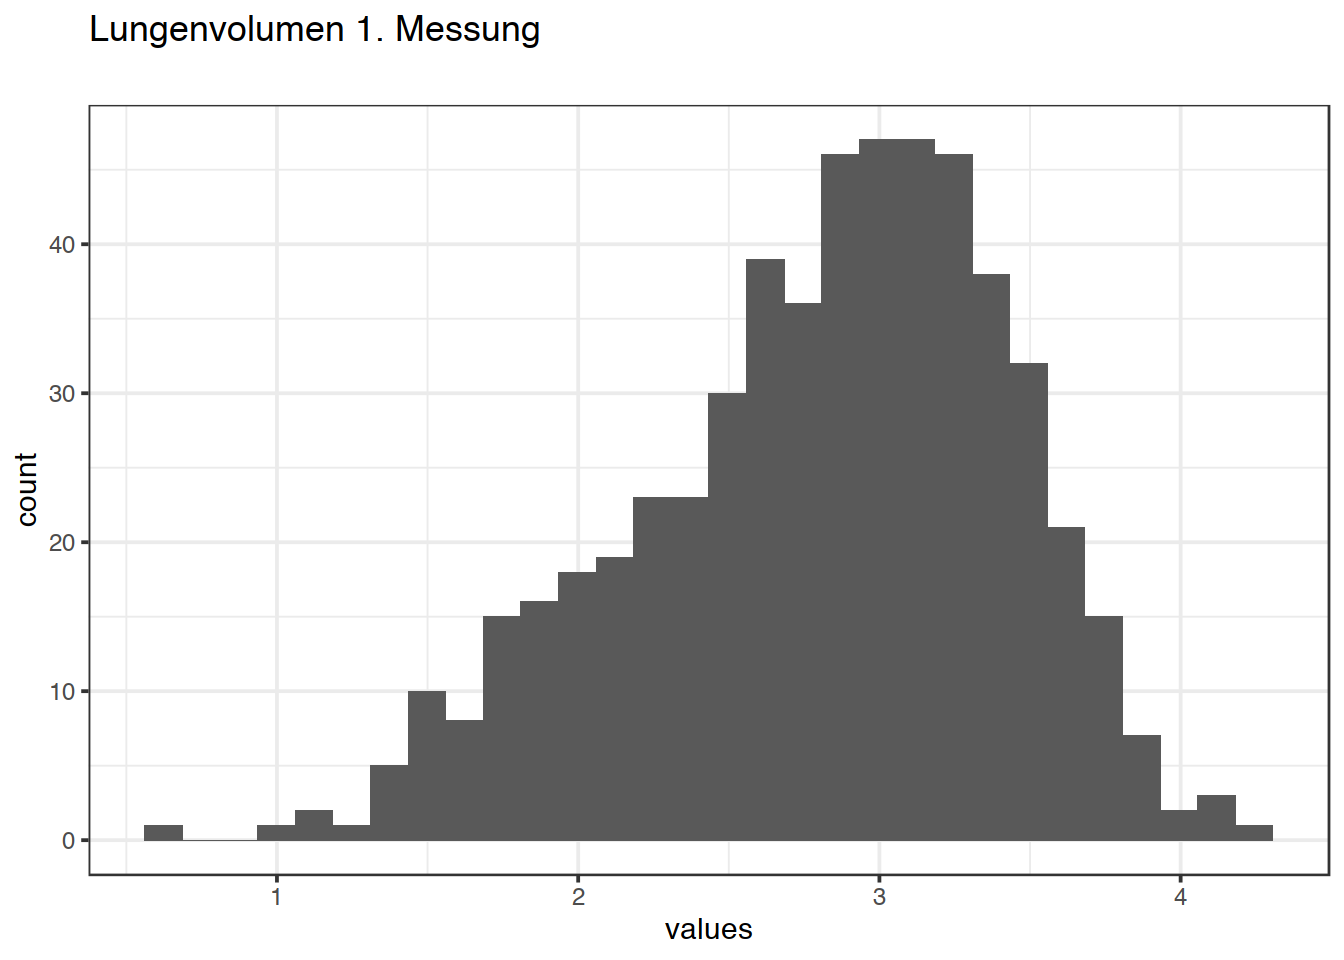 Distribution of values for Lungenvolumen 1. Messung